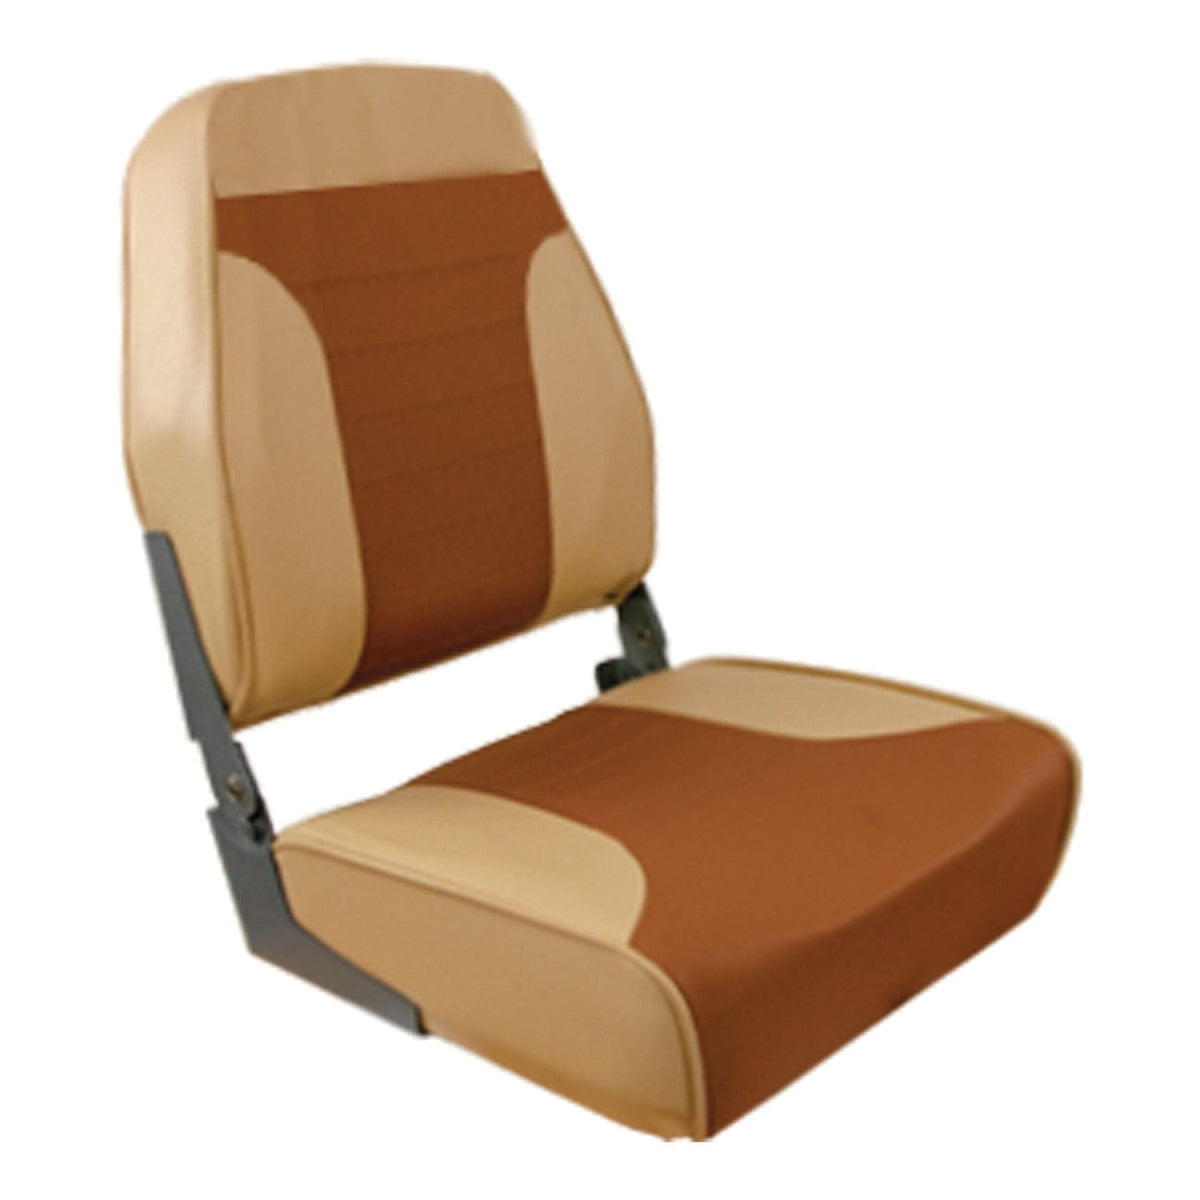 Springfield Qualifies for Free Shipping Springfield Economy High-Back Folding Seat Sand/Brown #1040668